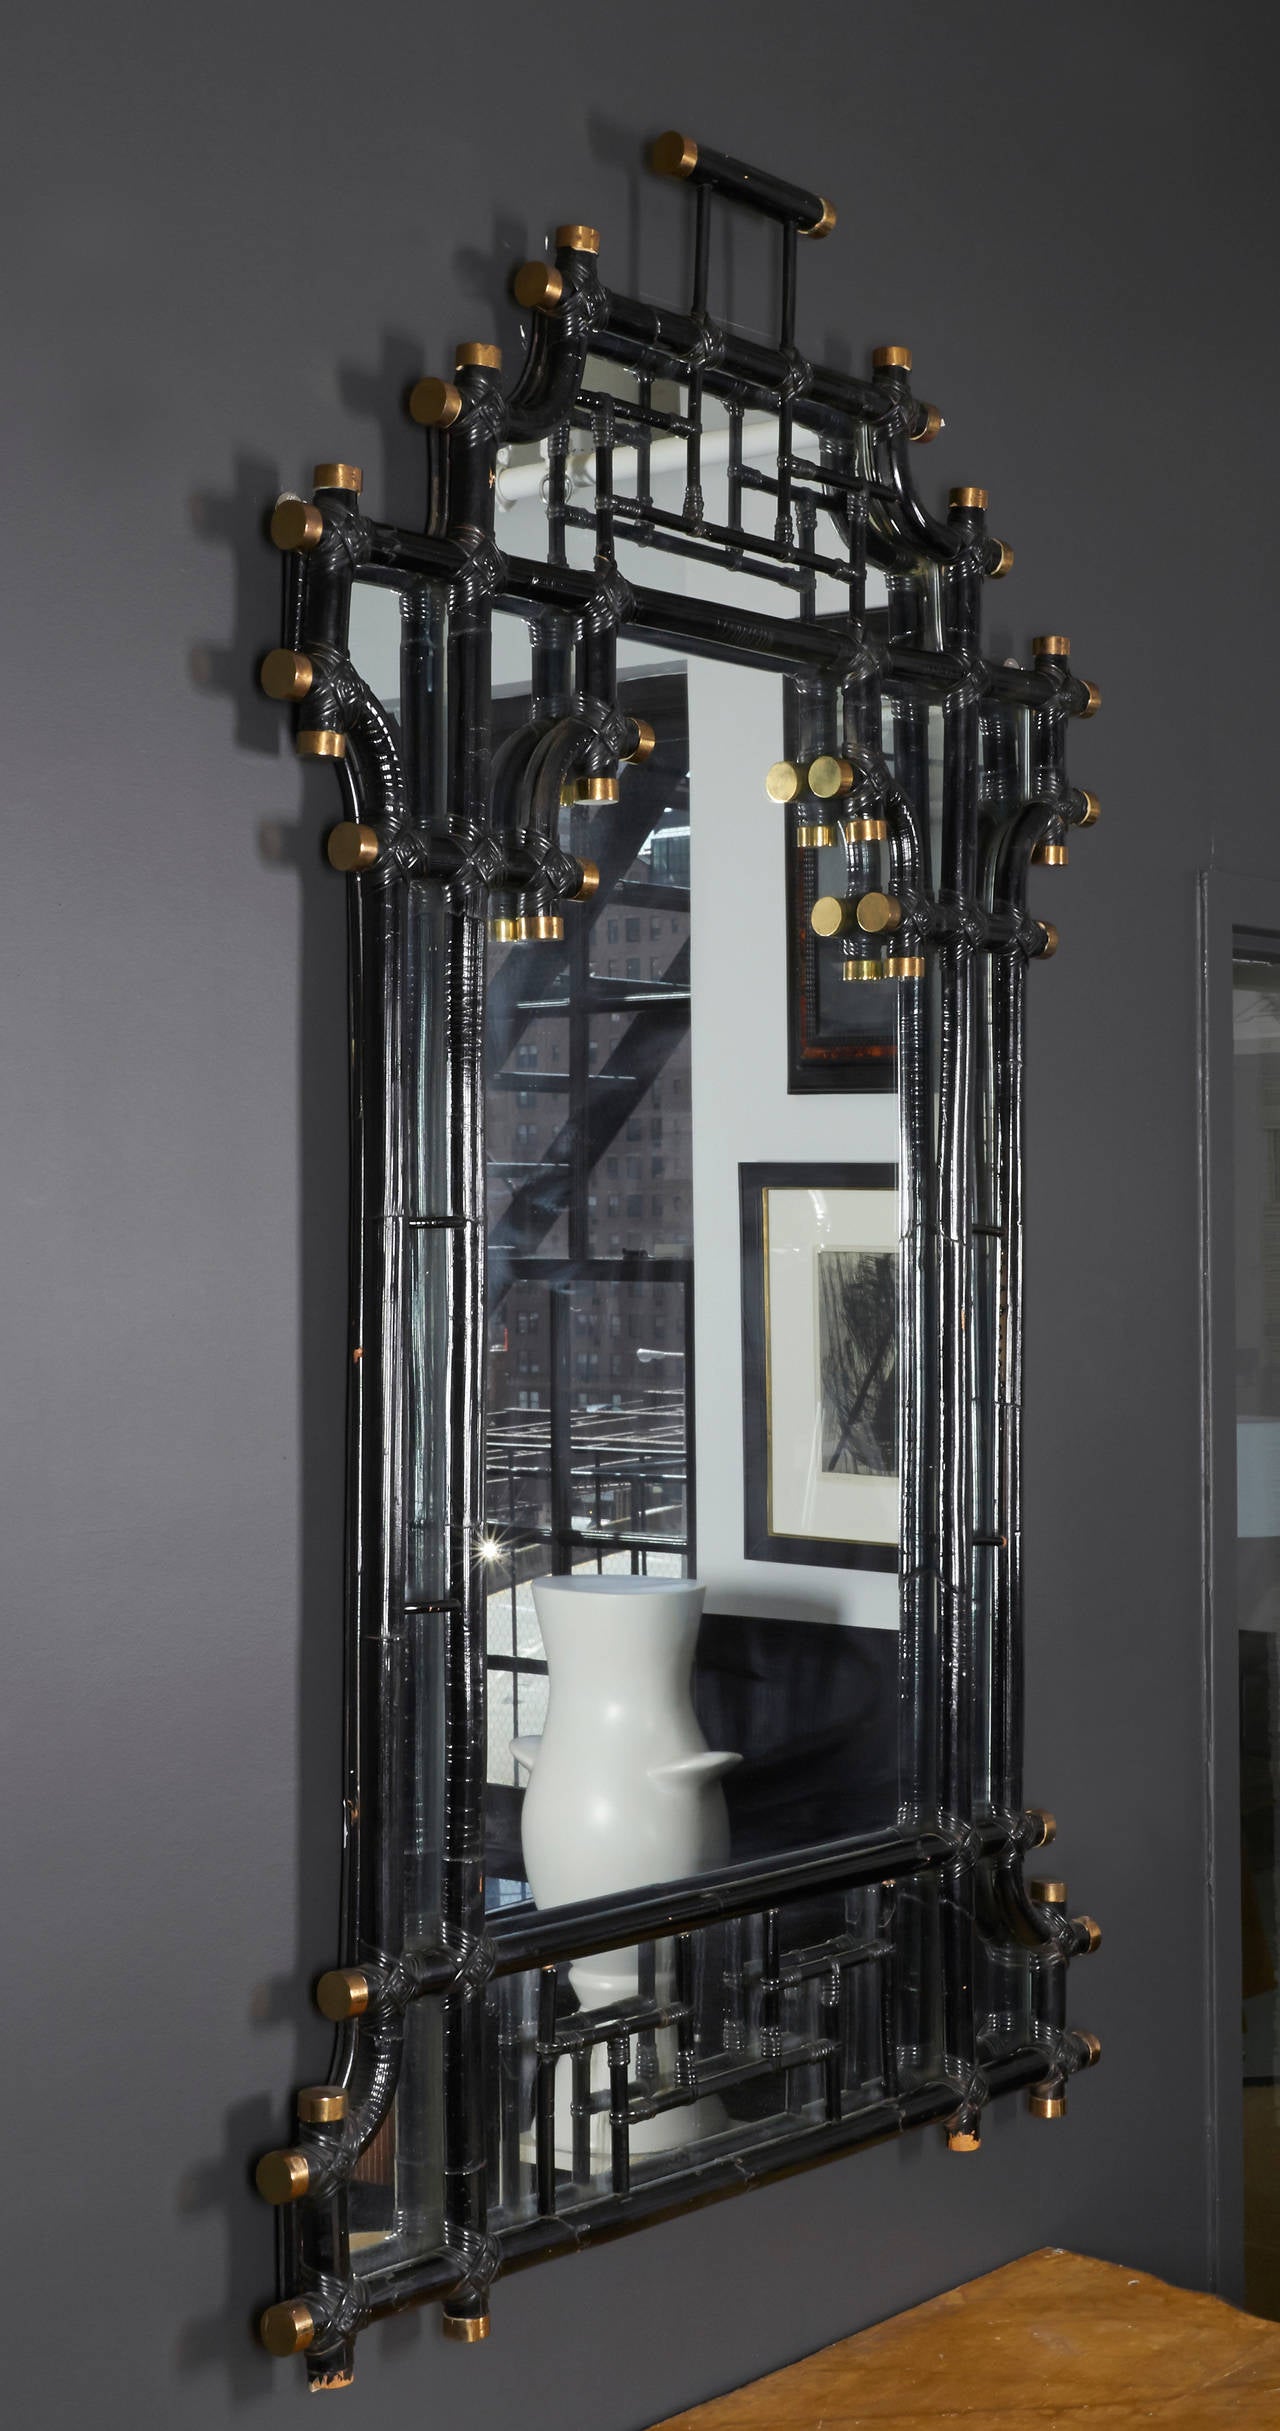 This mirror is a true stunner, beautifully made by the famous house of Jansen.
It has hand wrapped joints of black bamboo with brass caps at the end of each joint. All details are in very good condition and the black shiny frame is deep and rich.